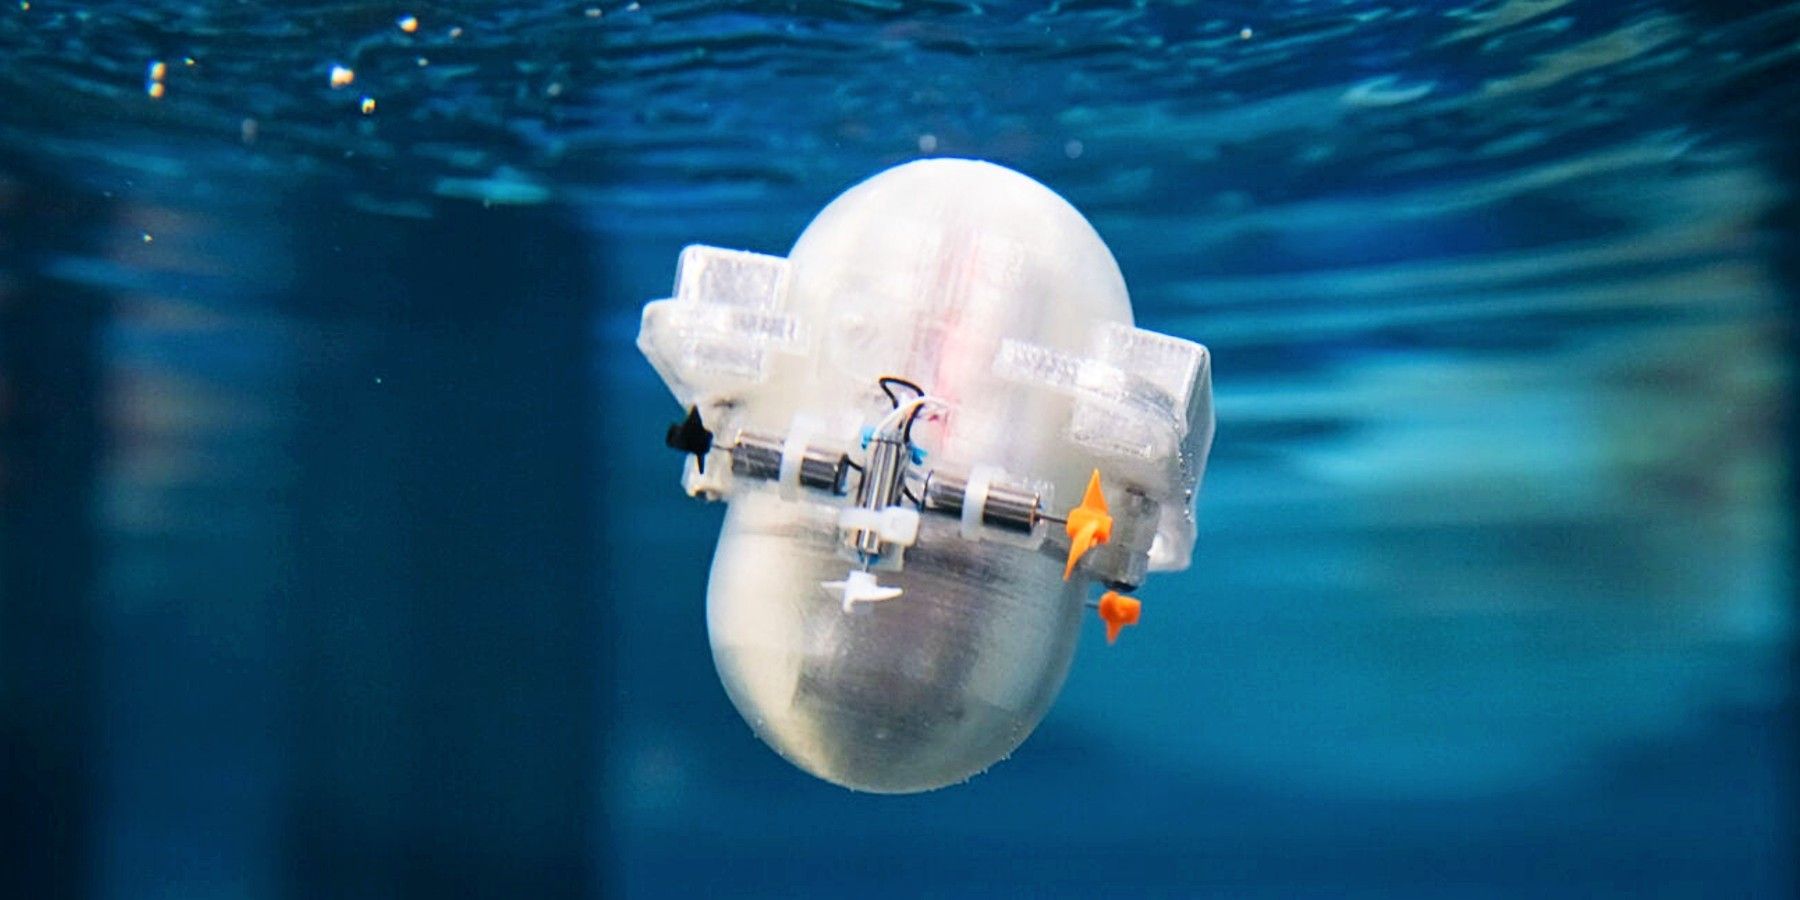 This Tiny Robot Is Learning How To Navigate The Ocean By Itself